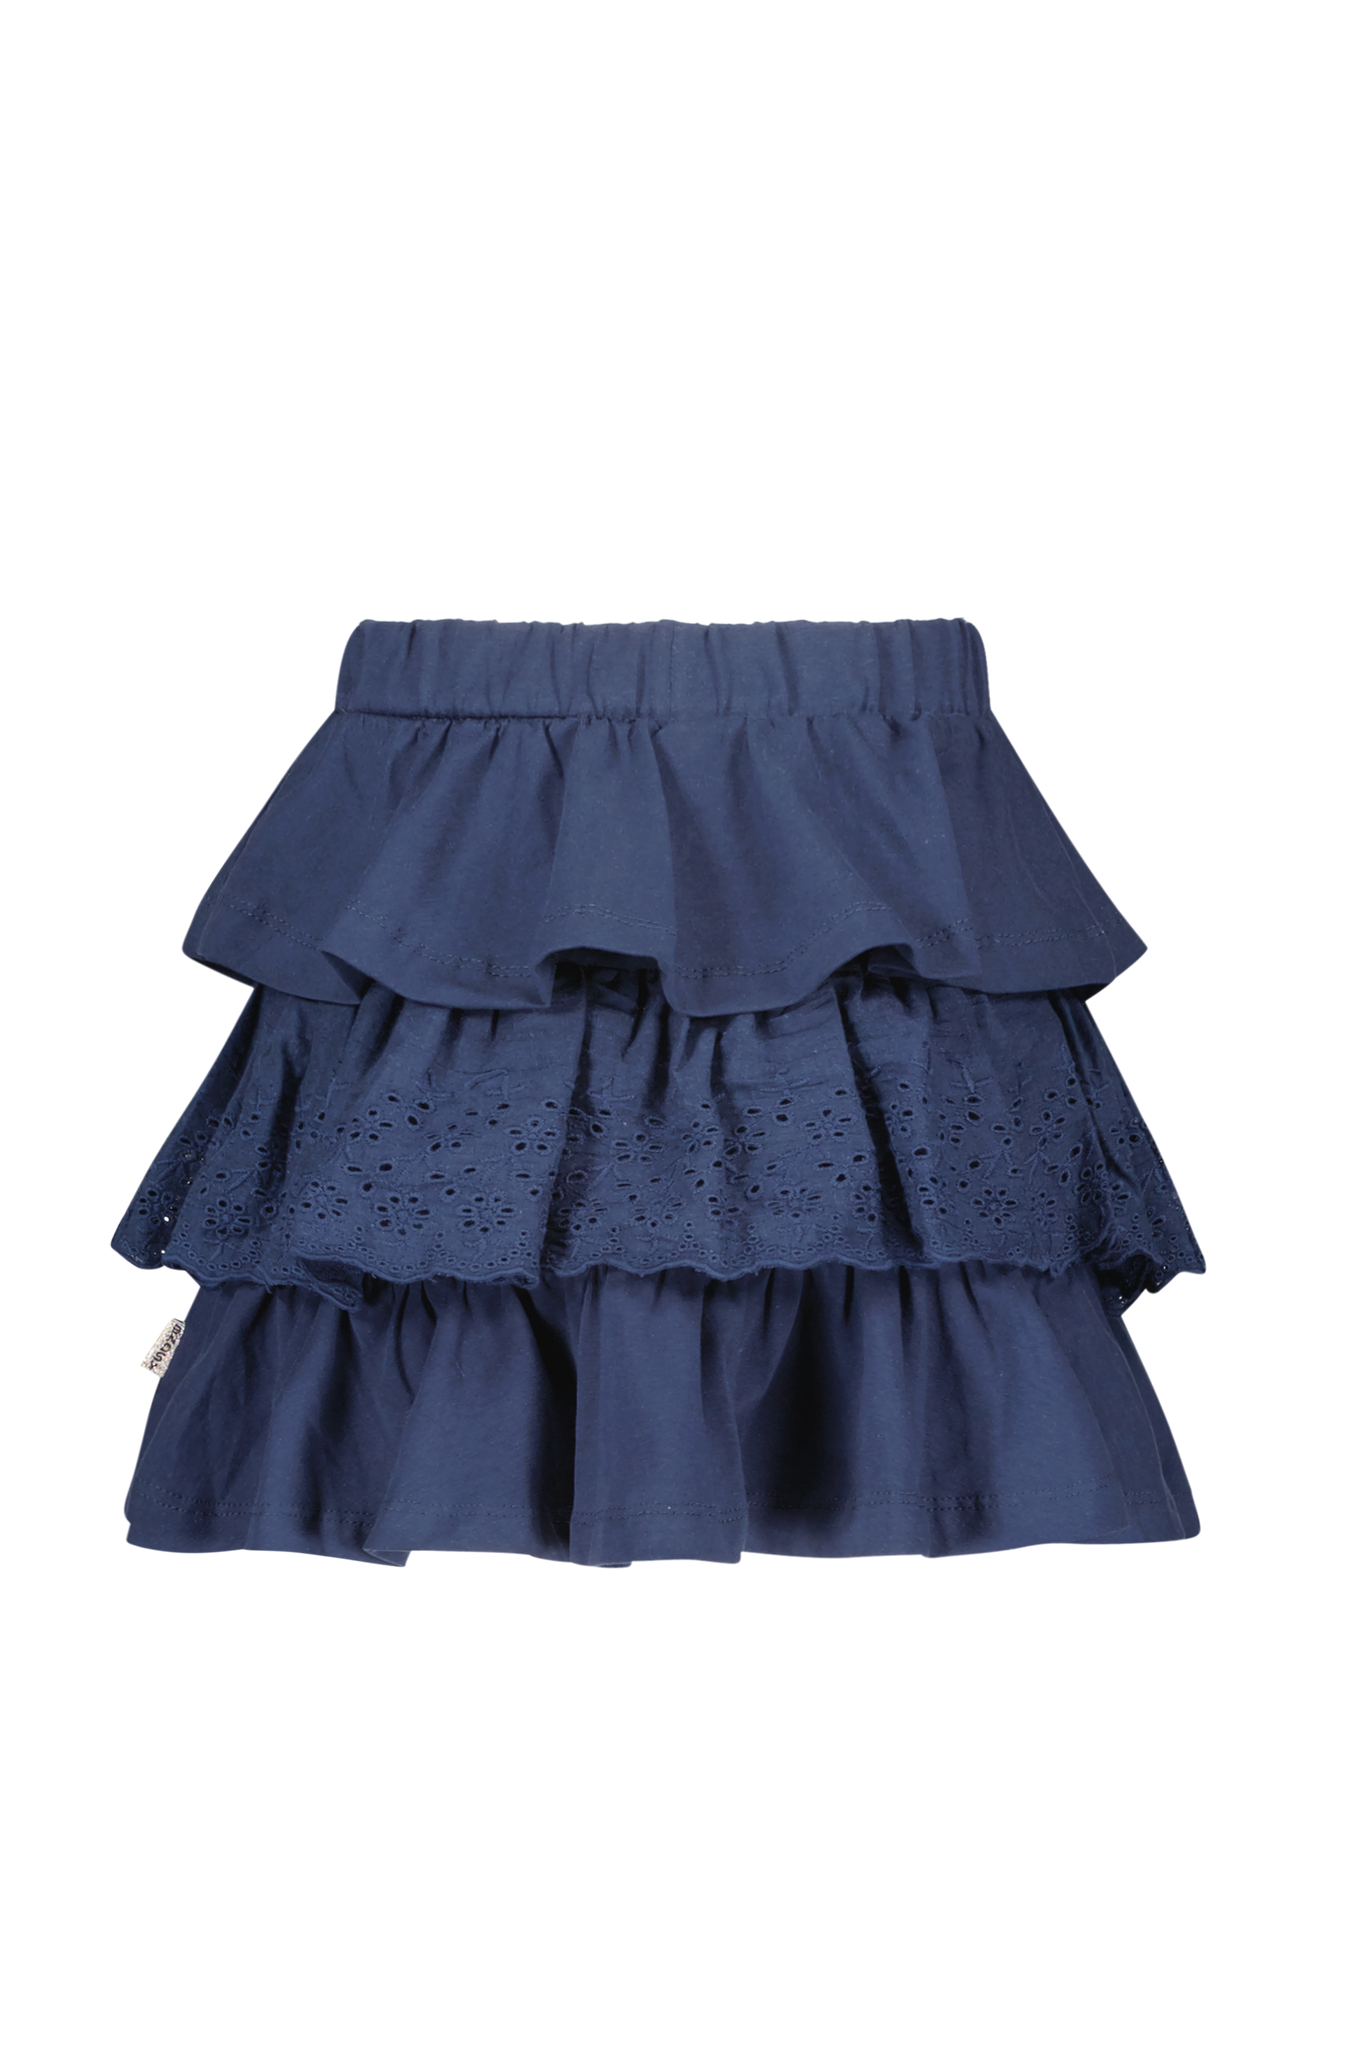 Girls 3 layer skirt. w/ 2nd layer embroidery lace fabric